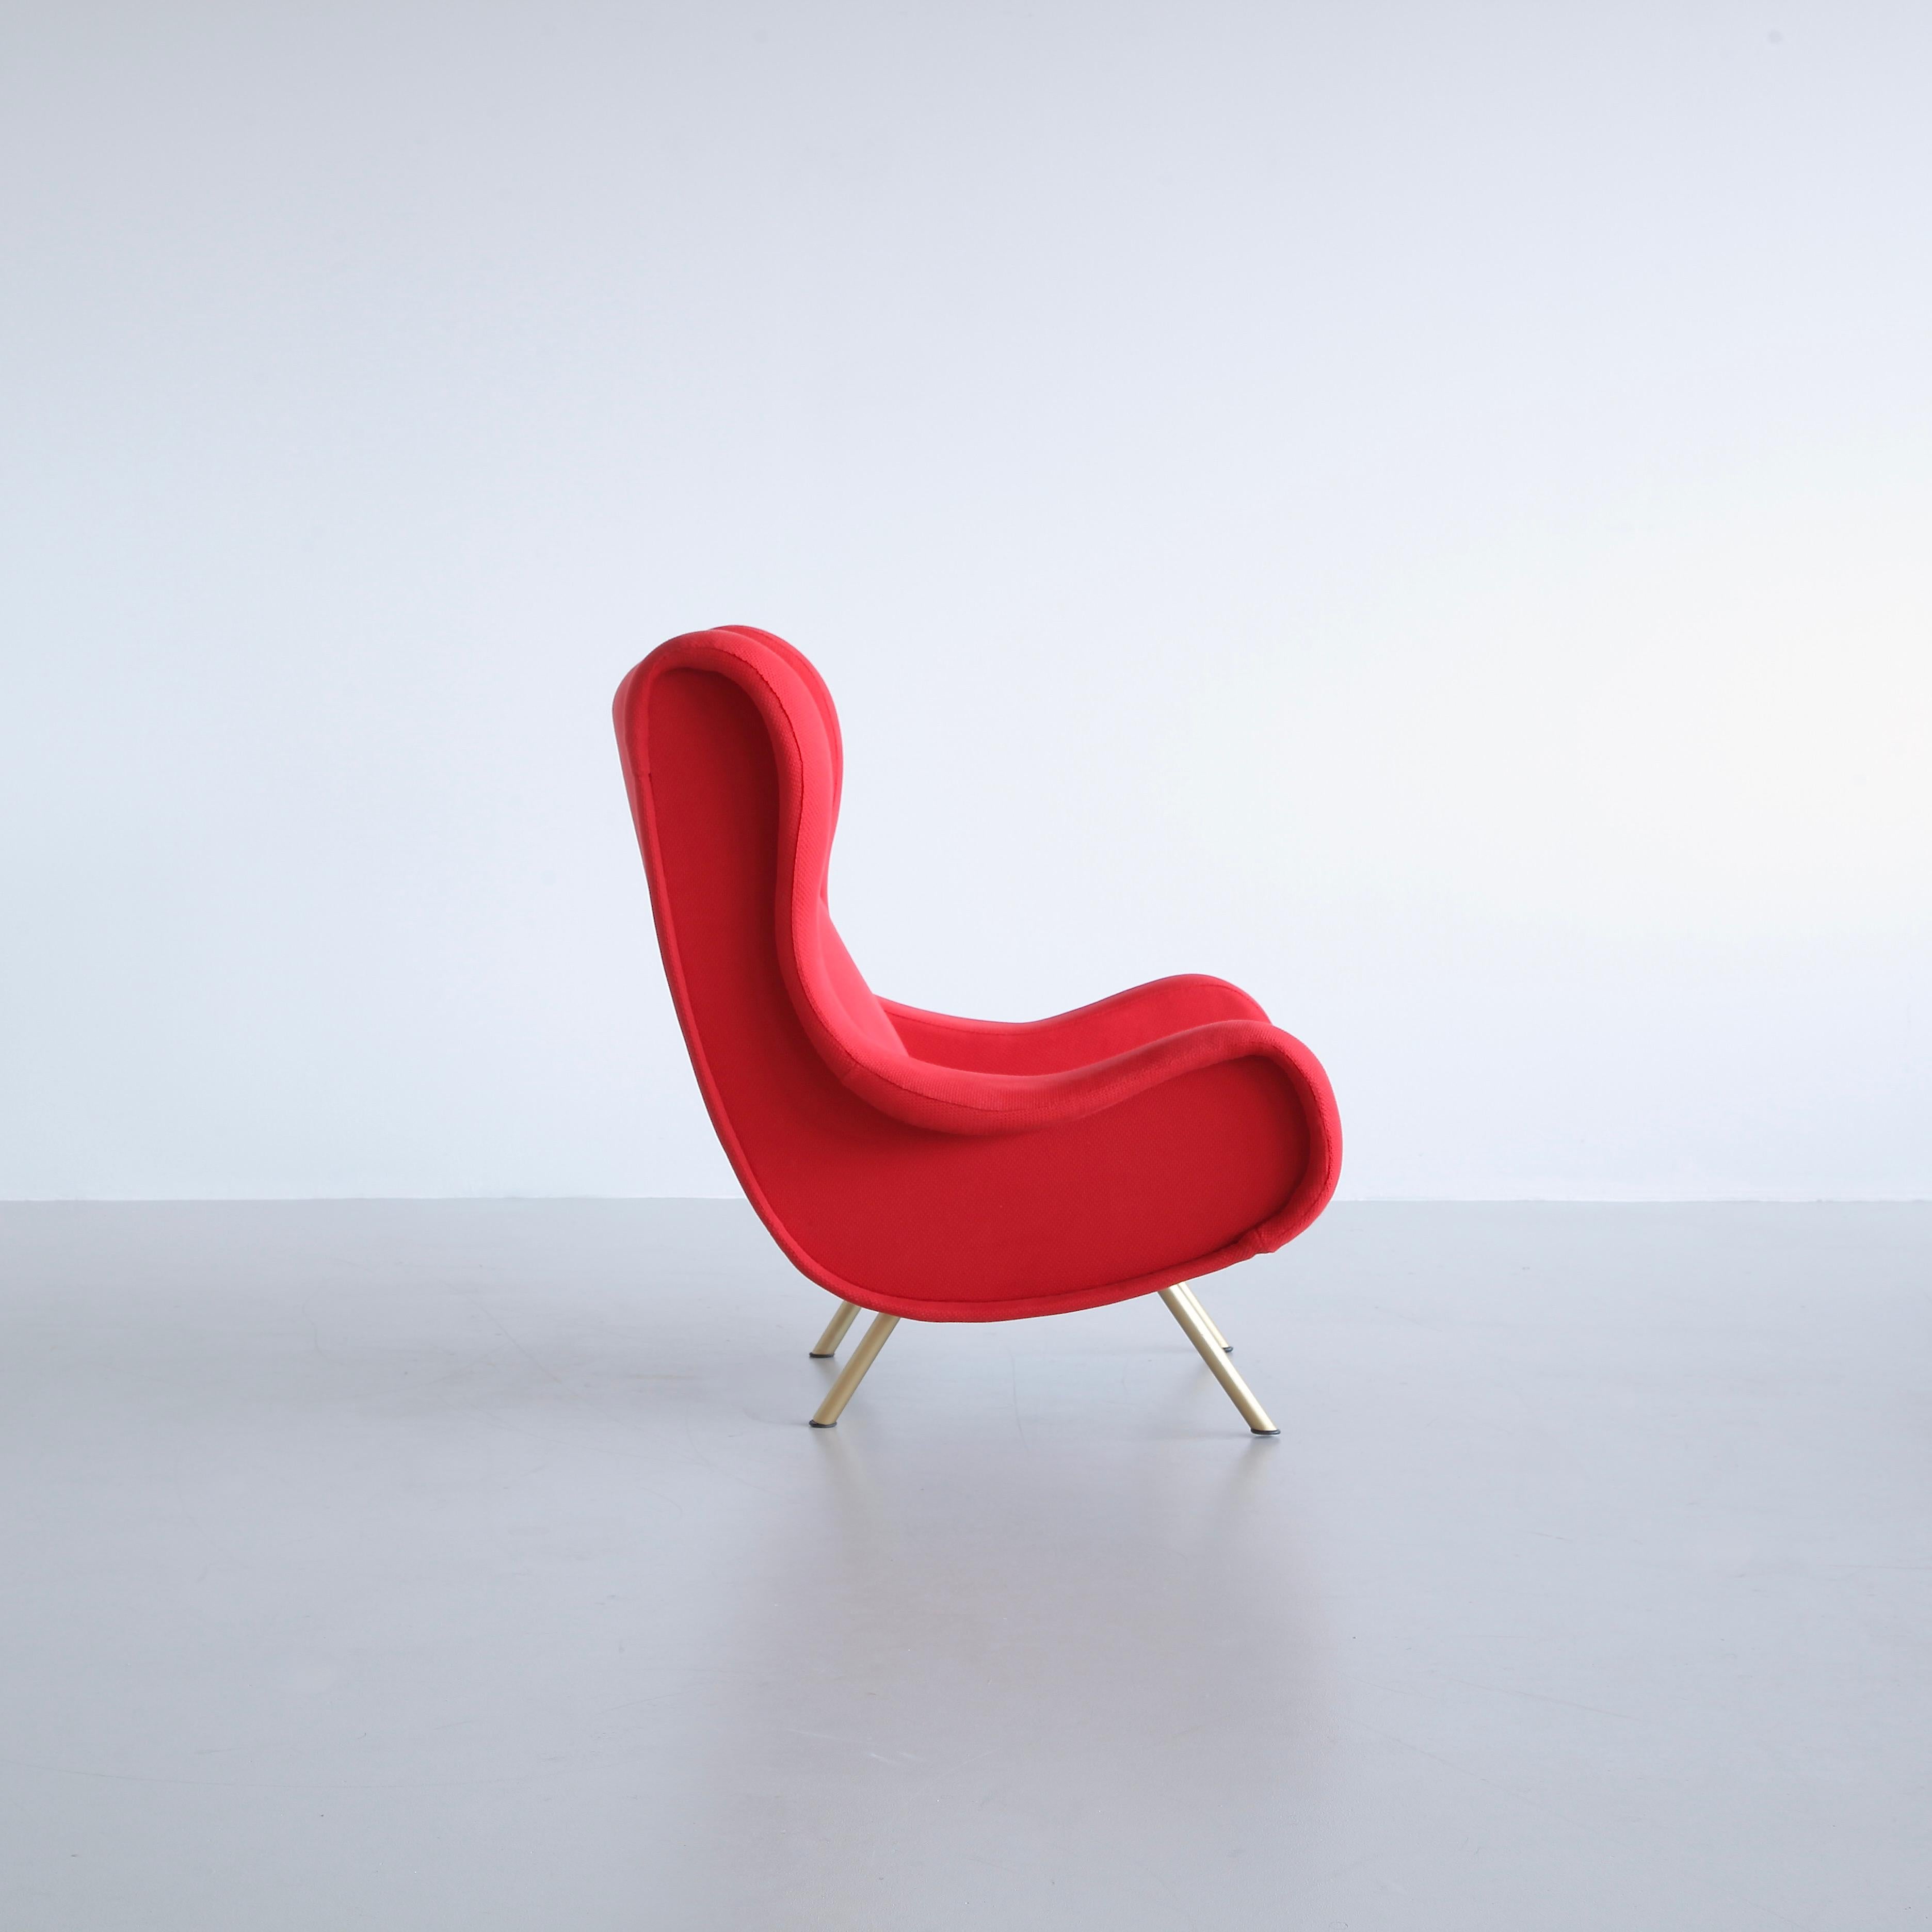 Senior chair, designed by Marco Zanuso, Italy, Arflex, 1951.

An early original lounge chair 'Senior' with red wool upholstery. Metal frame with brass legs fittings and wooden construction.

Literature: Repertorio del Design Italiano 1950-2000,